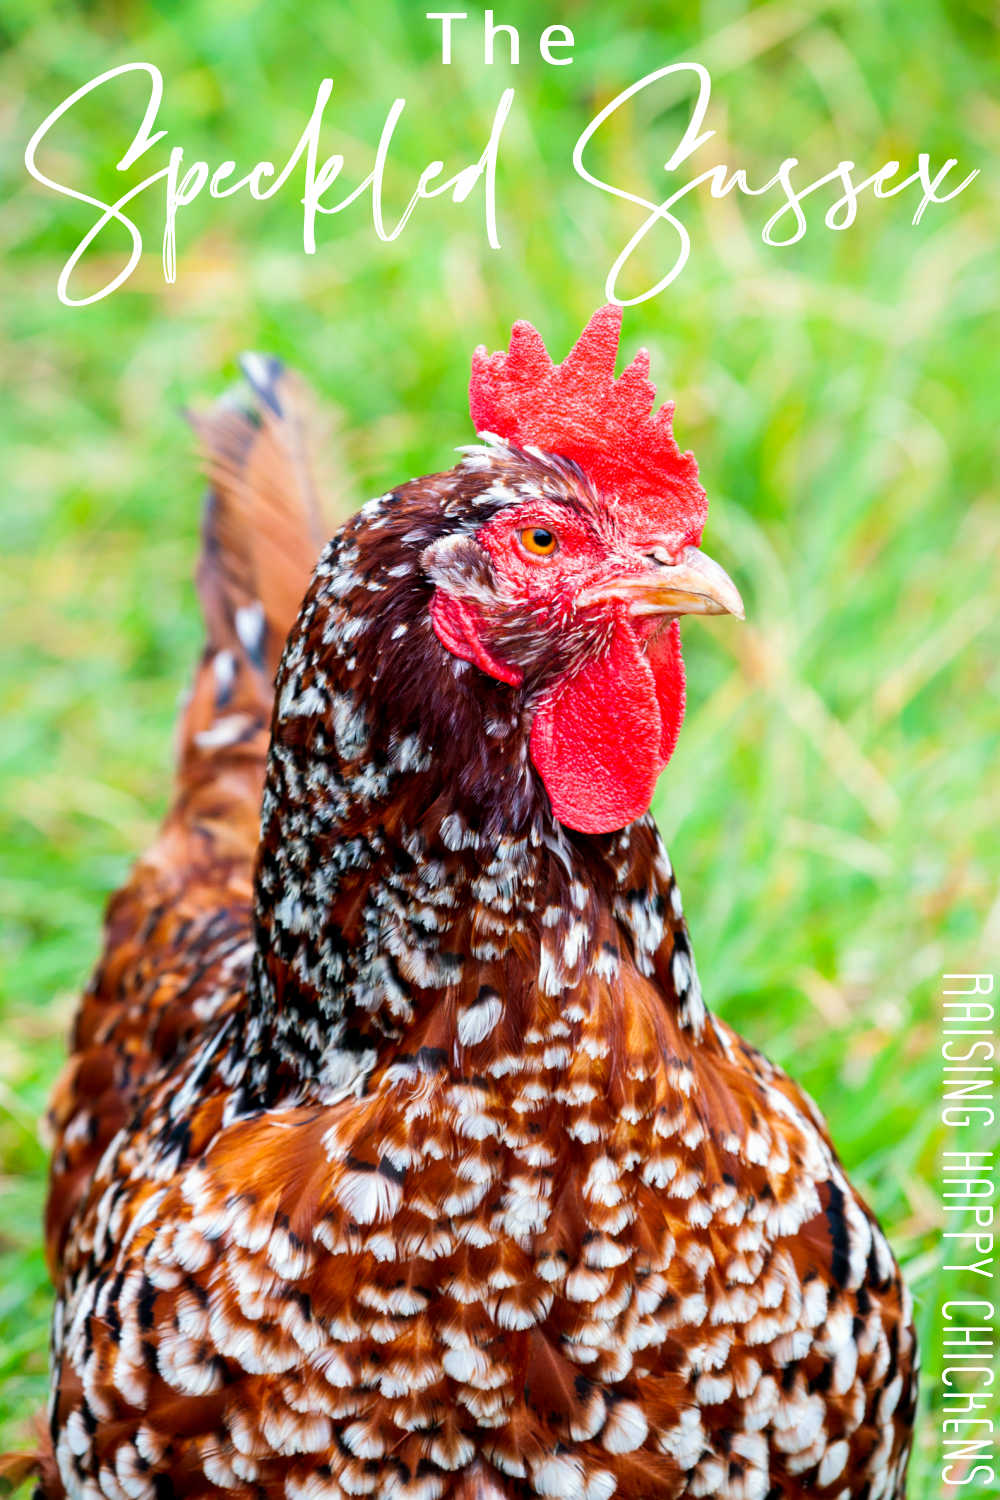 III. Sussex Hen Personality Traits